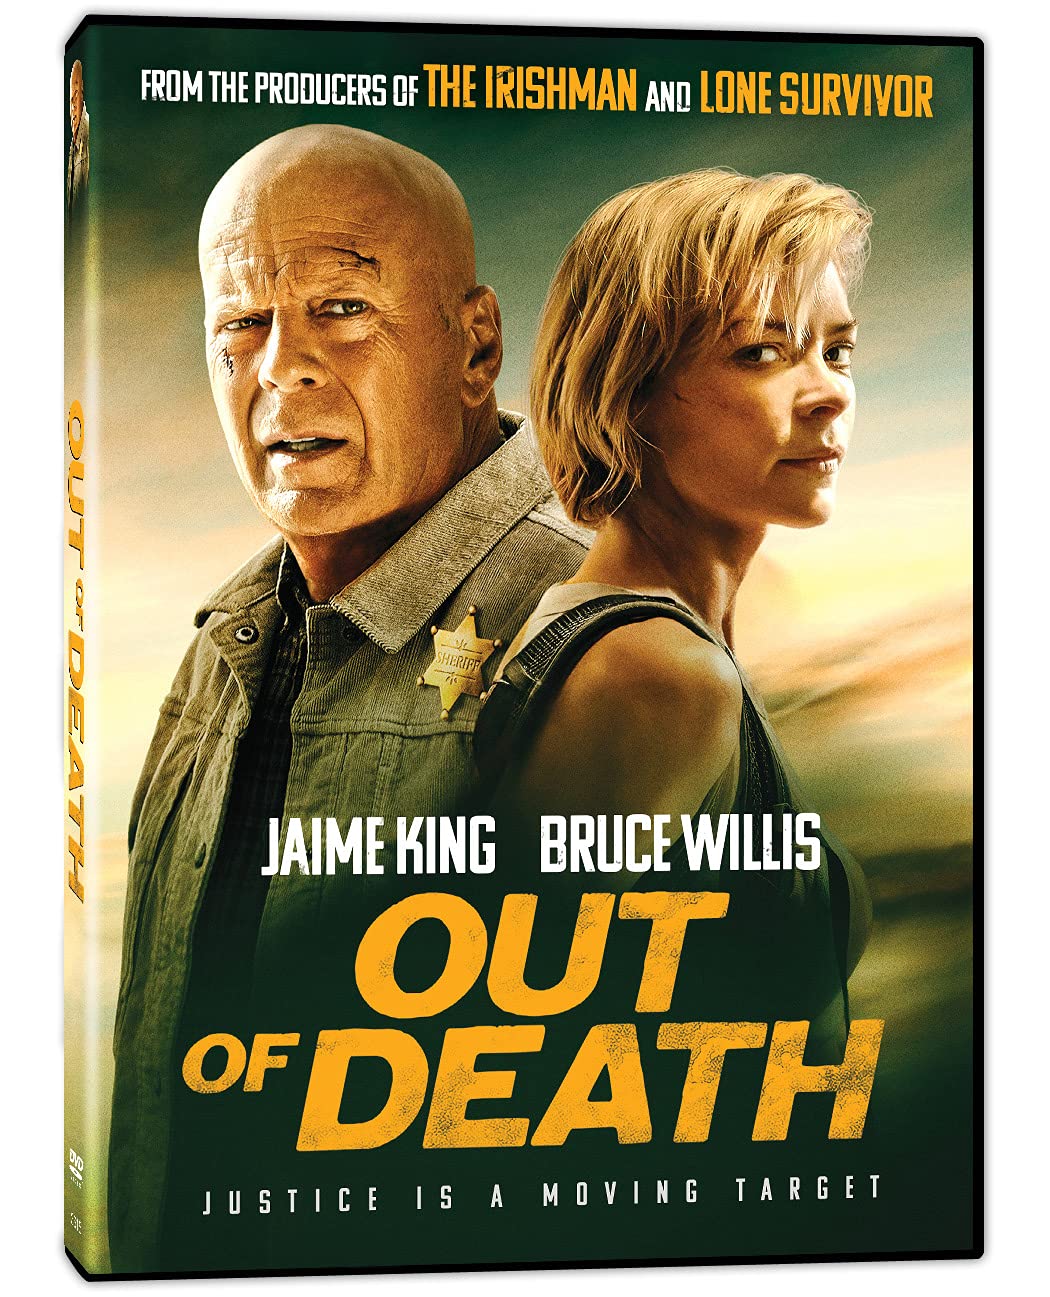 Image for "Out of Death"